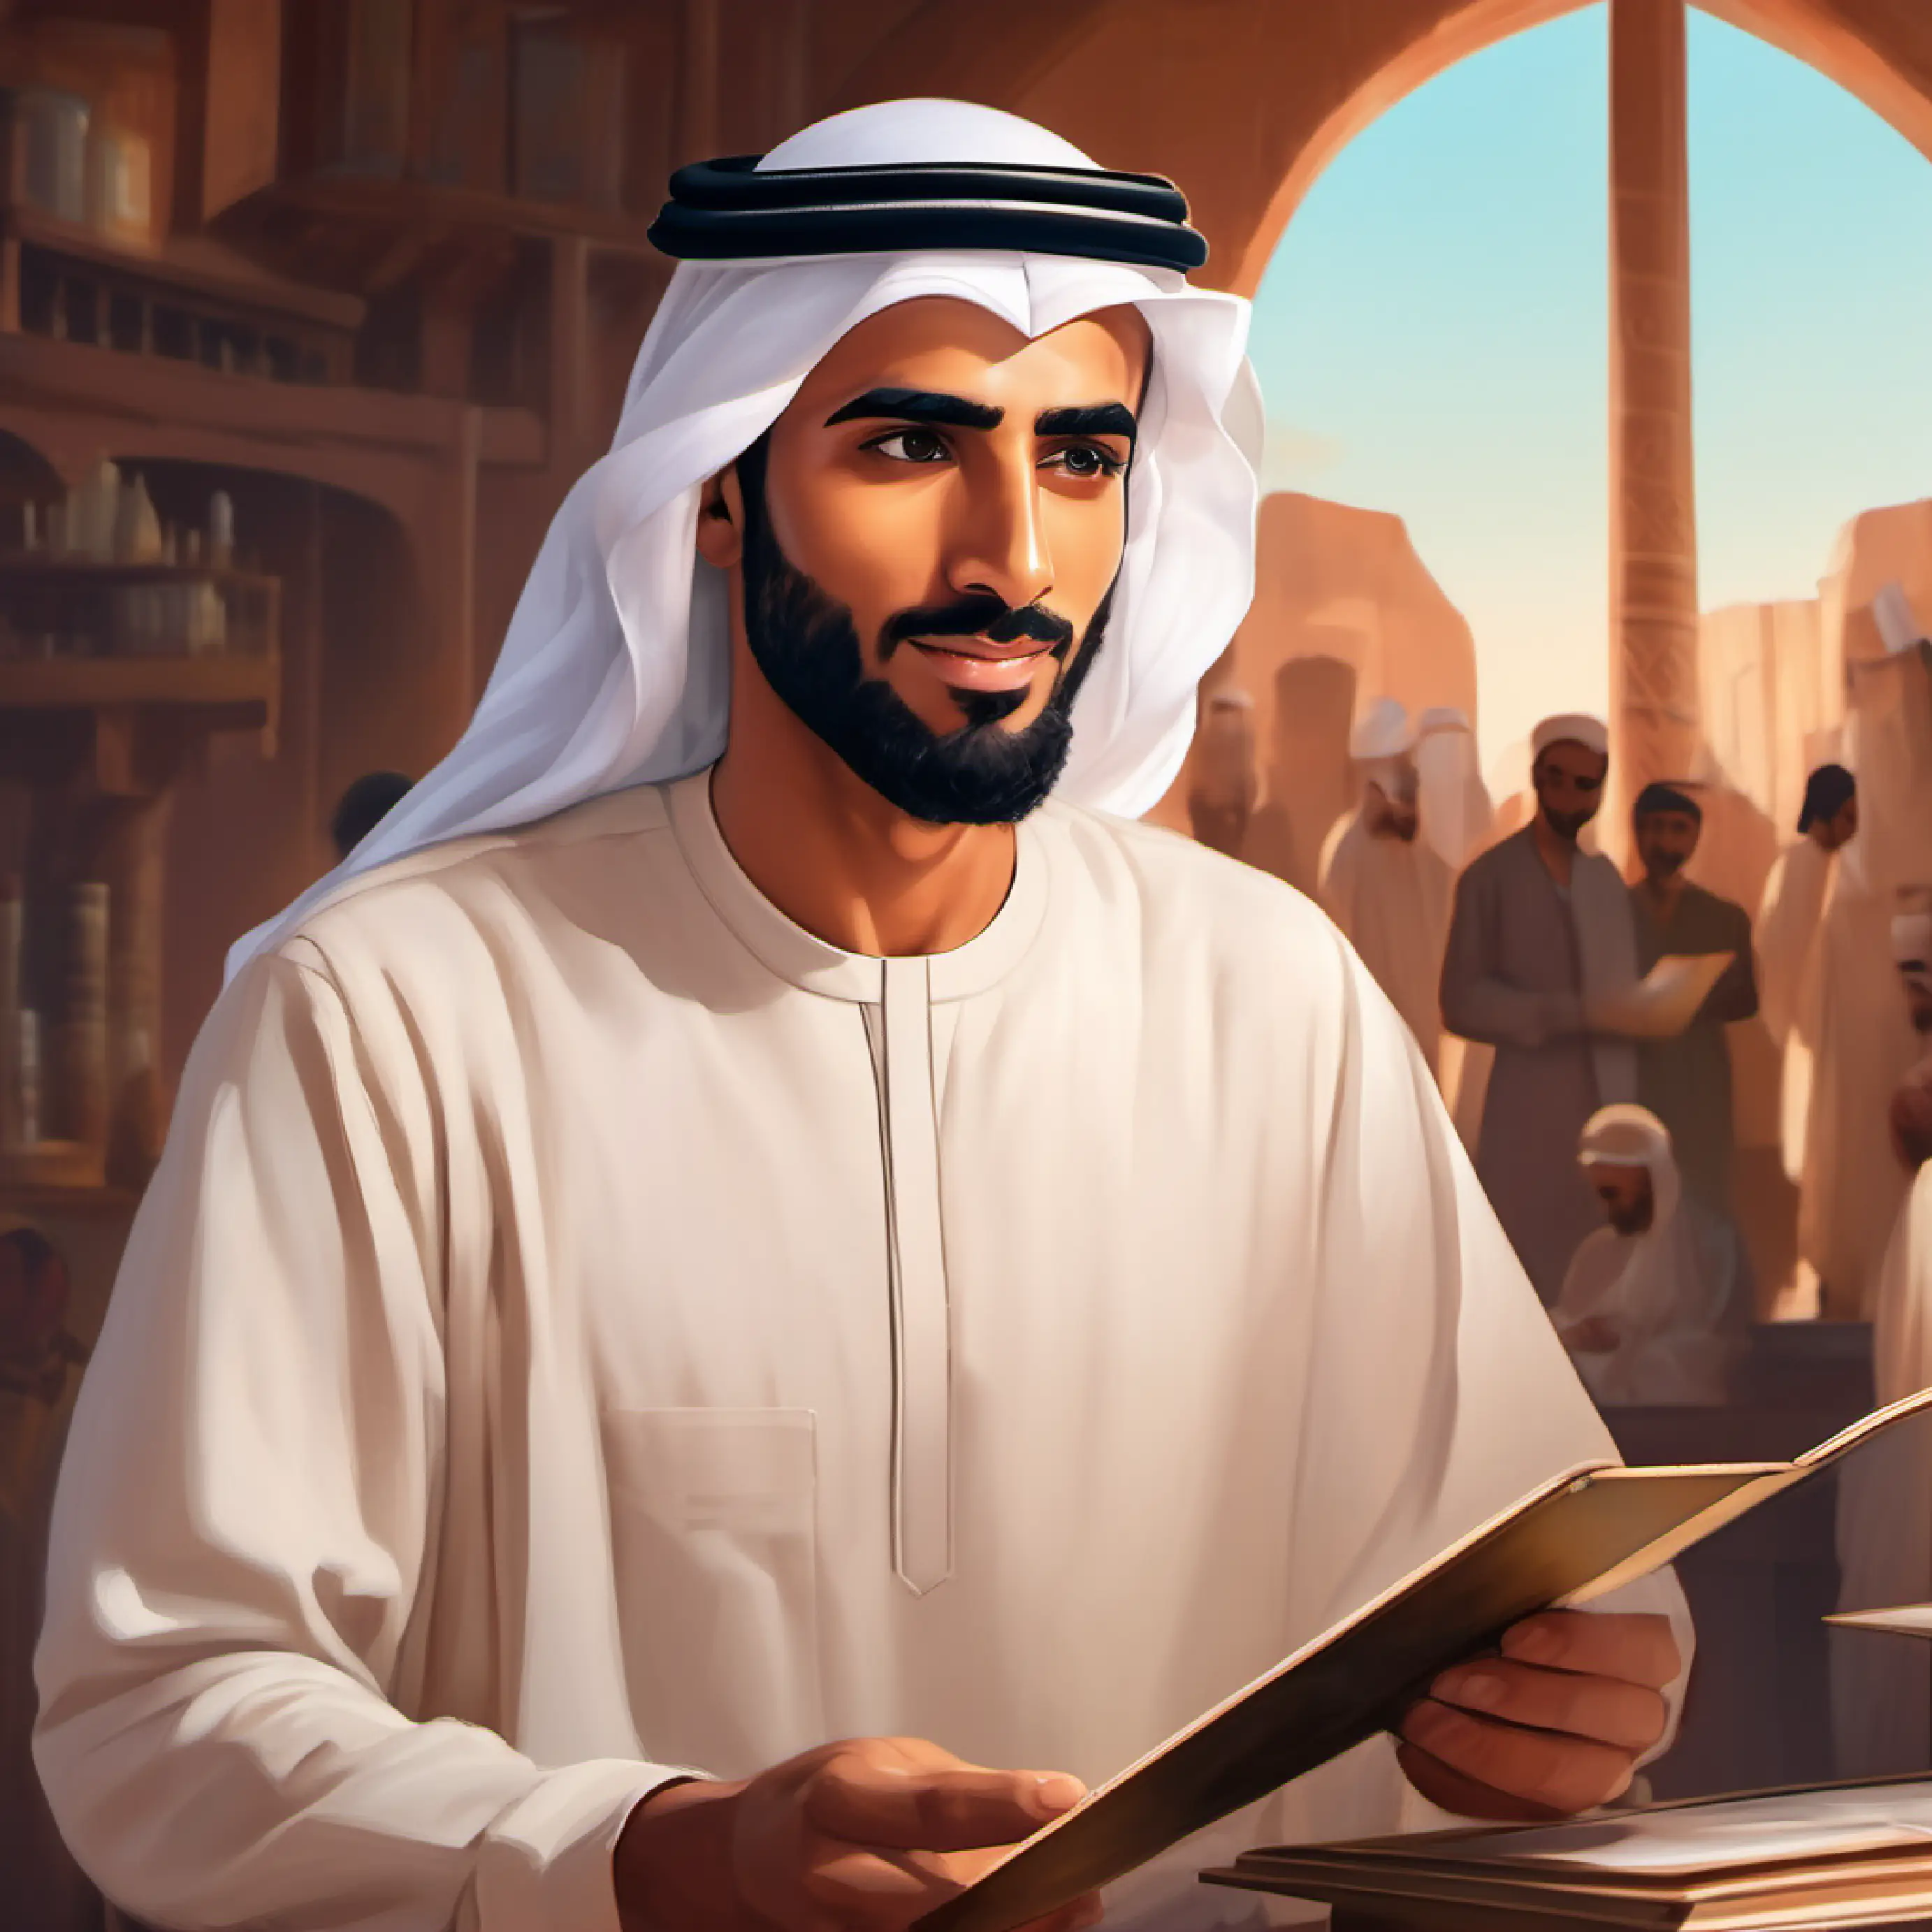 Young Emirati man, bronze skin, earnest dark eyes, with a scientific gaze presenting his project, catching local leaders' attention.